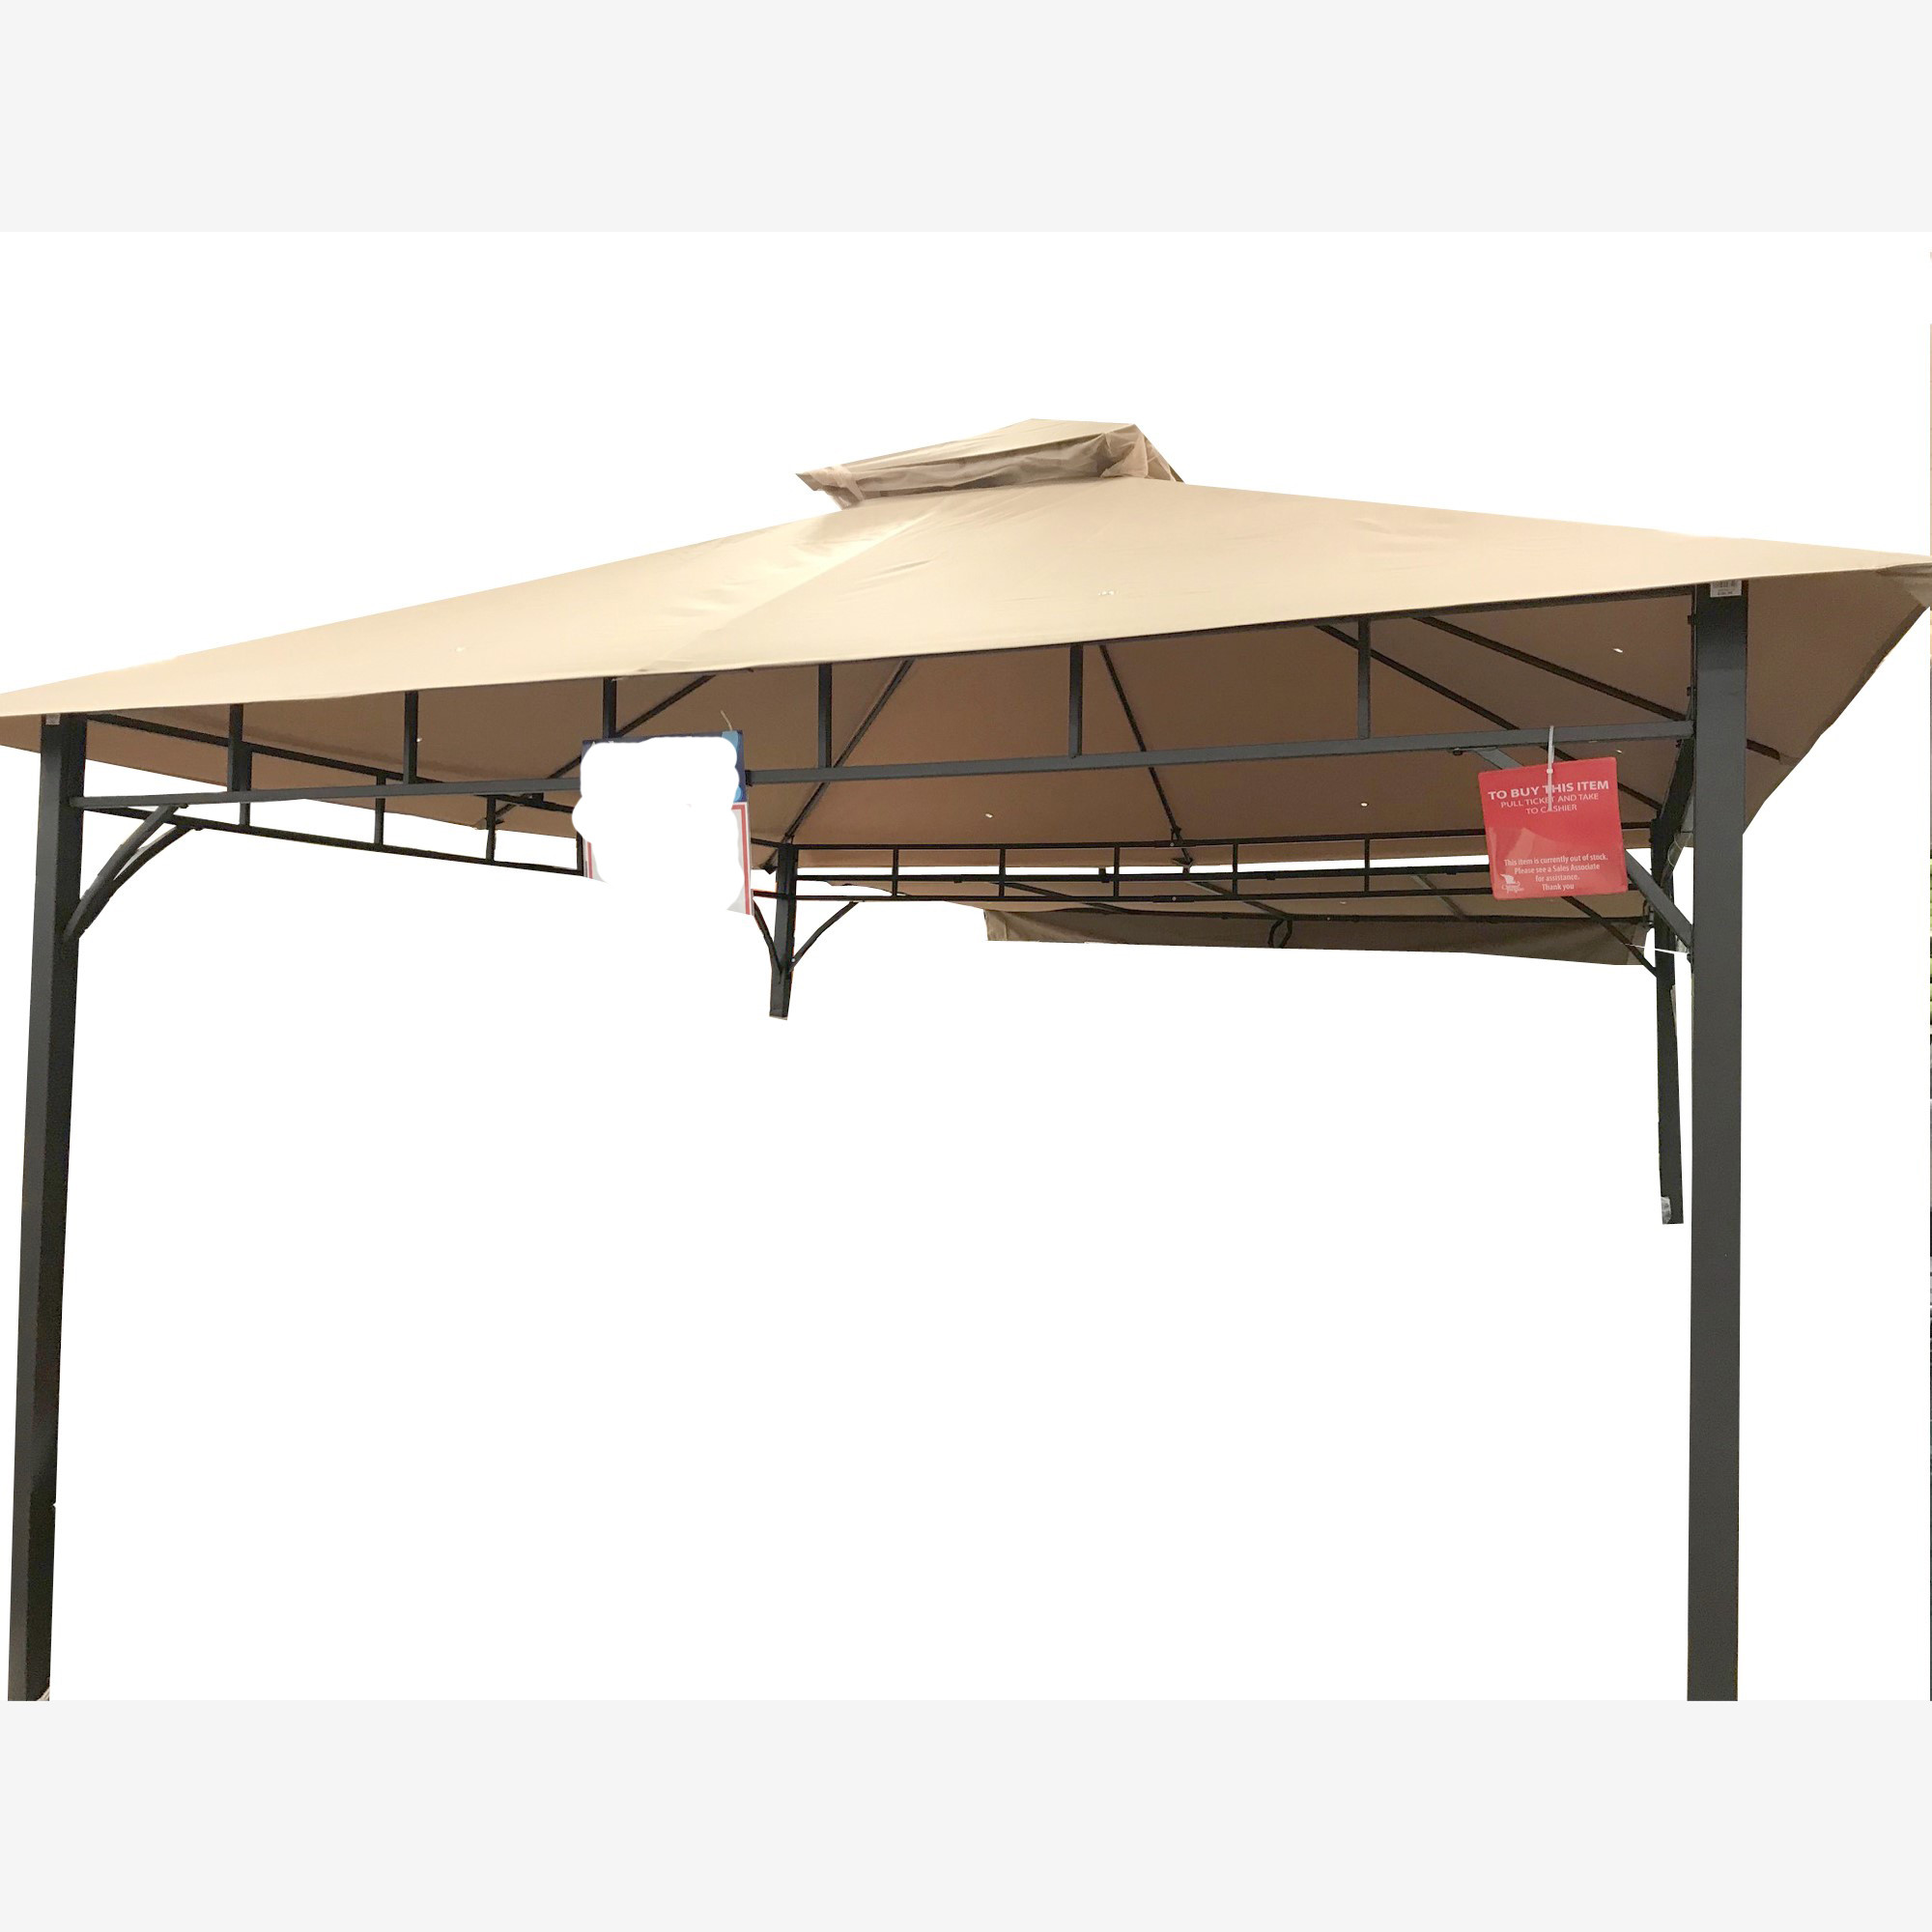 Christmas Tree Shop Awning
 Replacement Canopy and Awning Set for CTS Awning Gaz